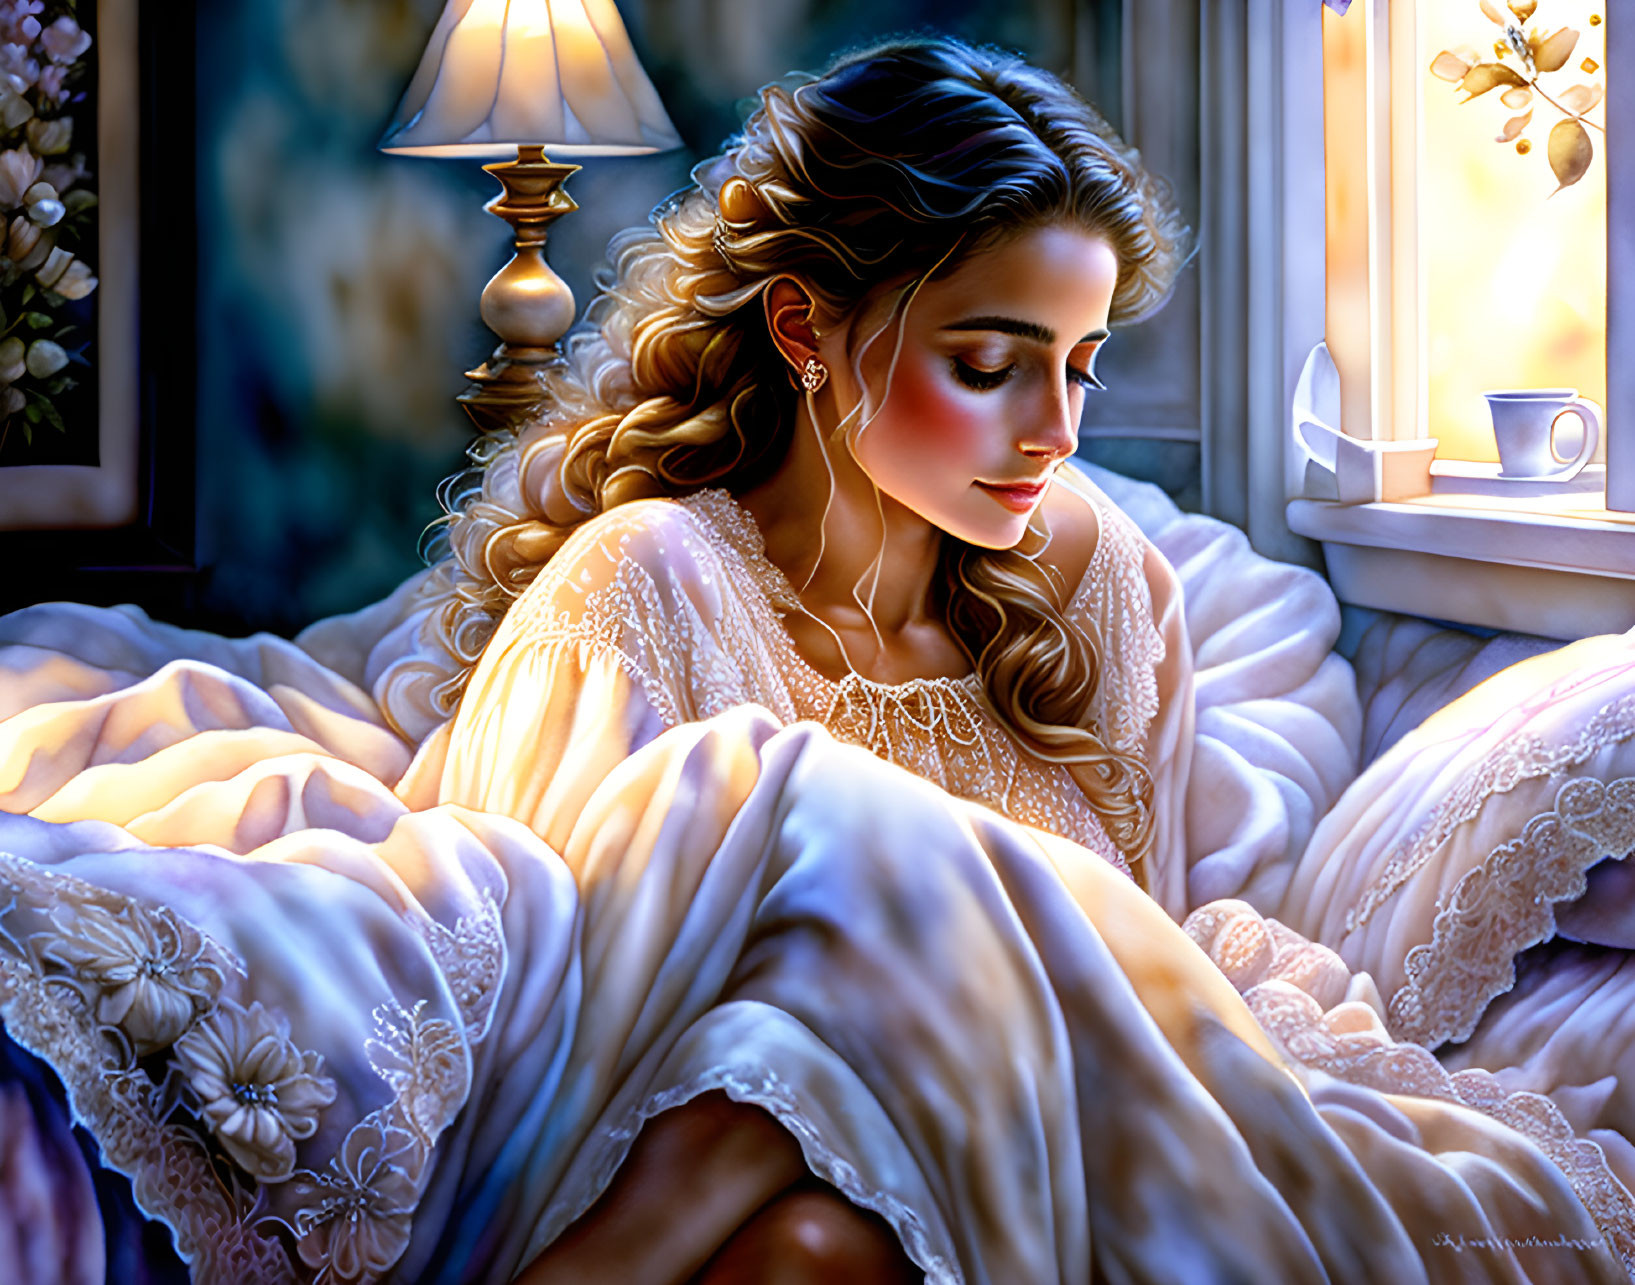 Woman resting in bed under soft light and moonlit glow.